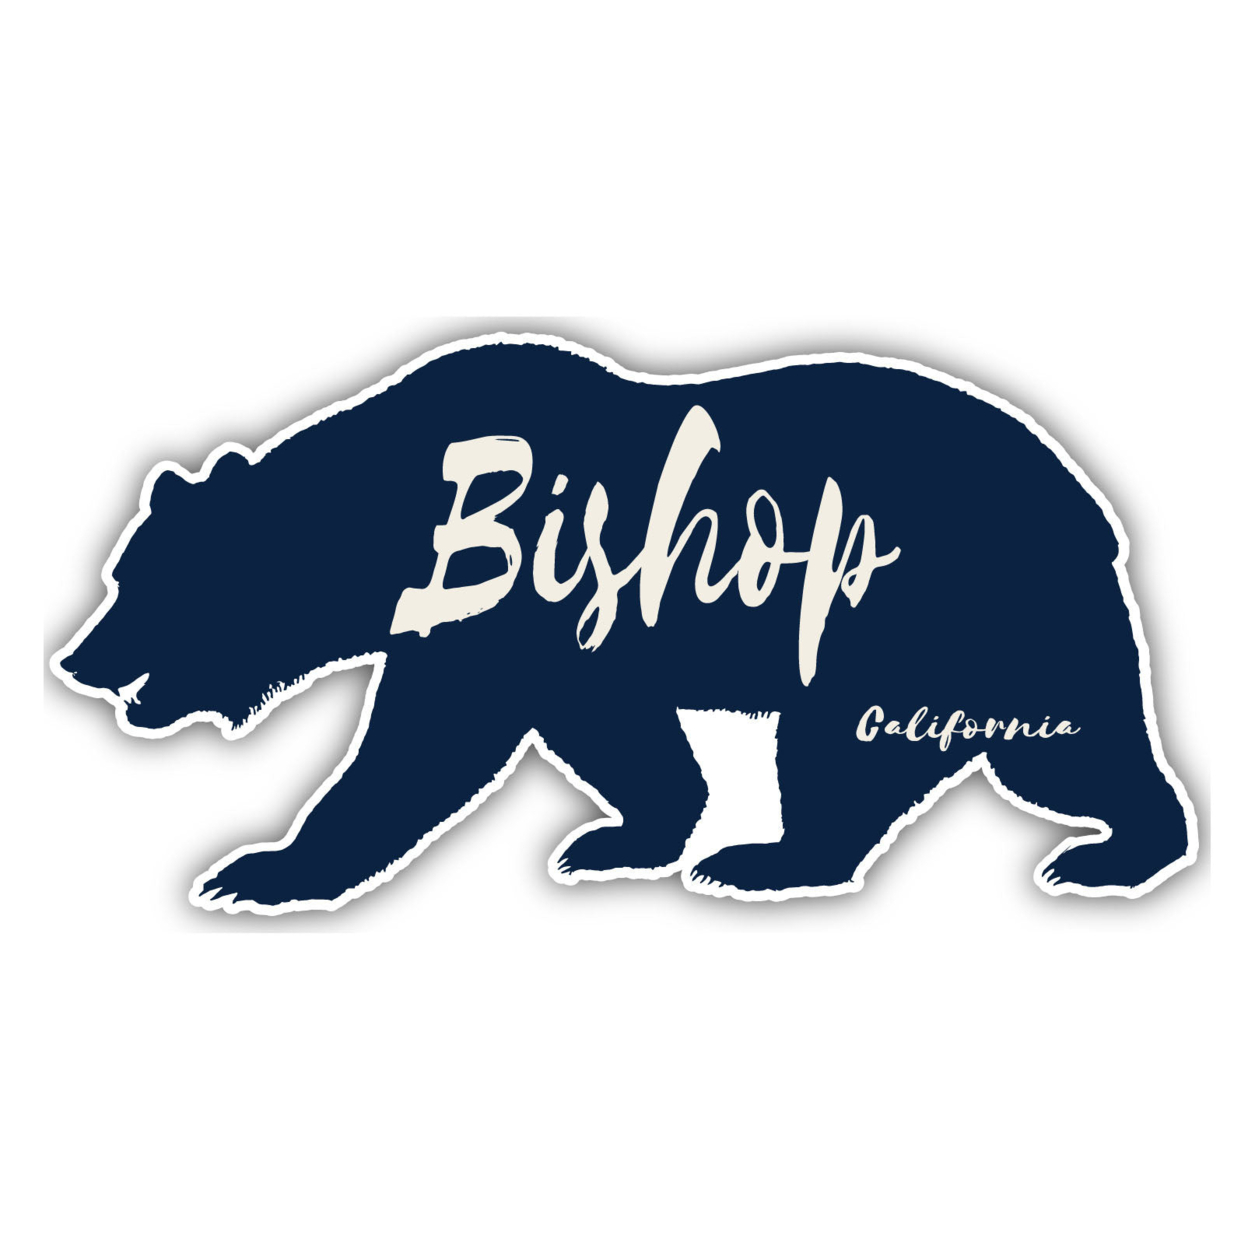 Bishop California Souvenir Decorative Stickers (Choose Theme And Size) - 4-Pack, 6-Inch, Bear